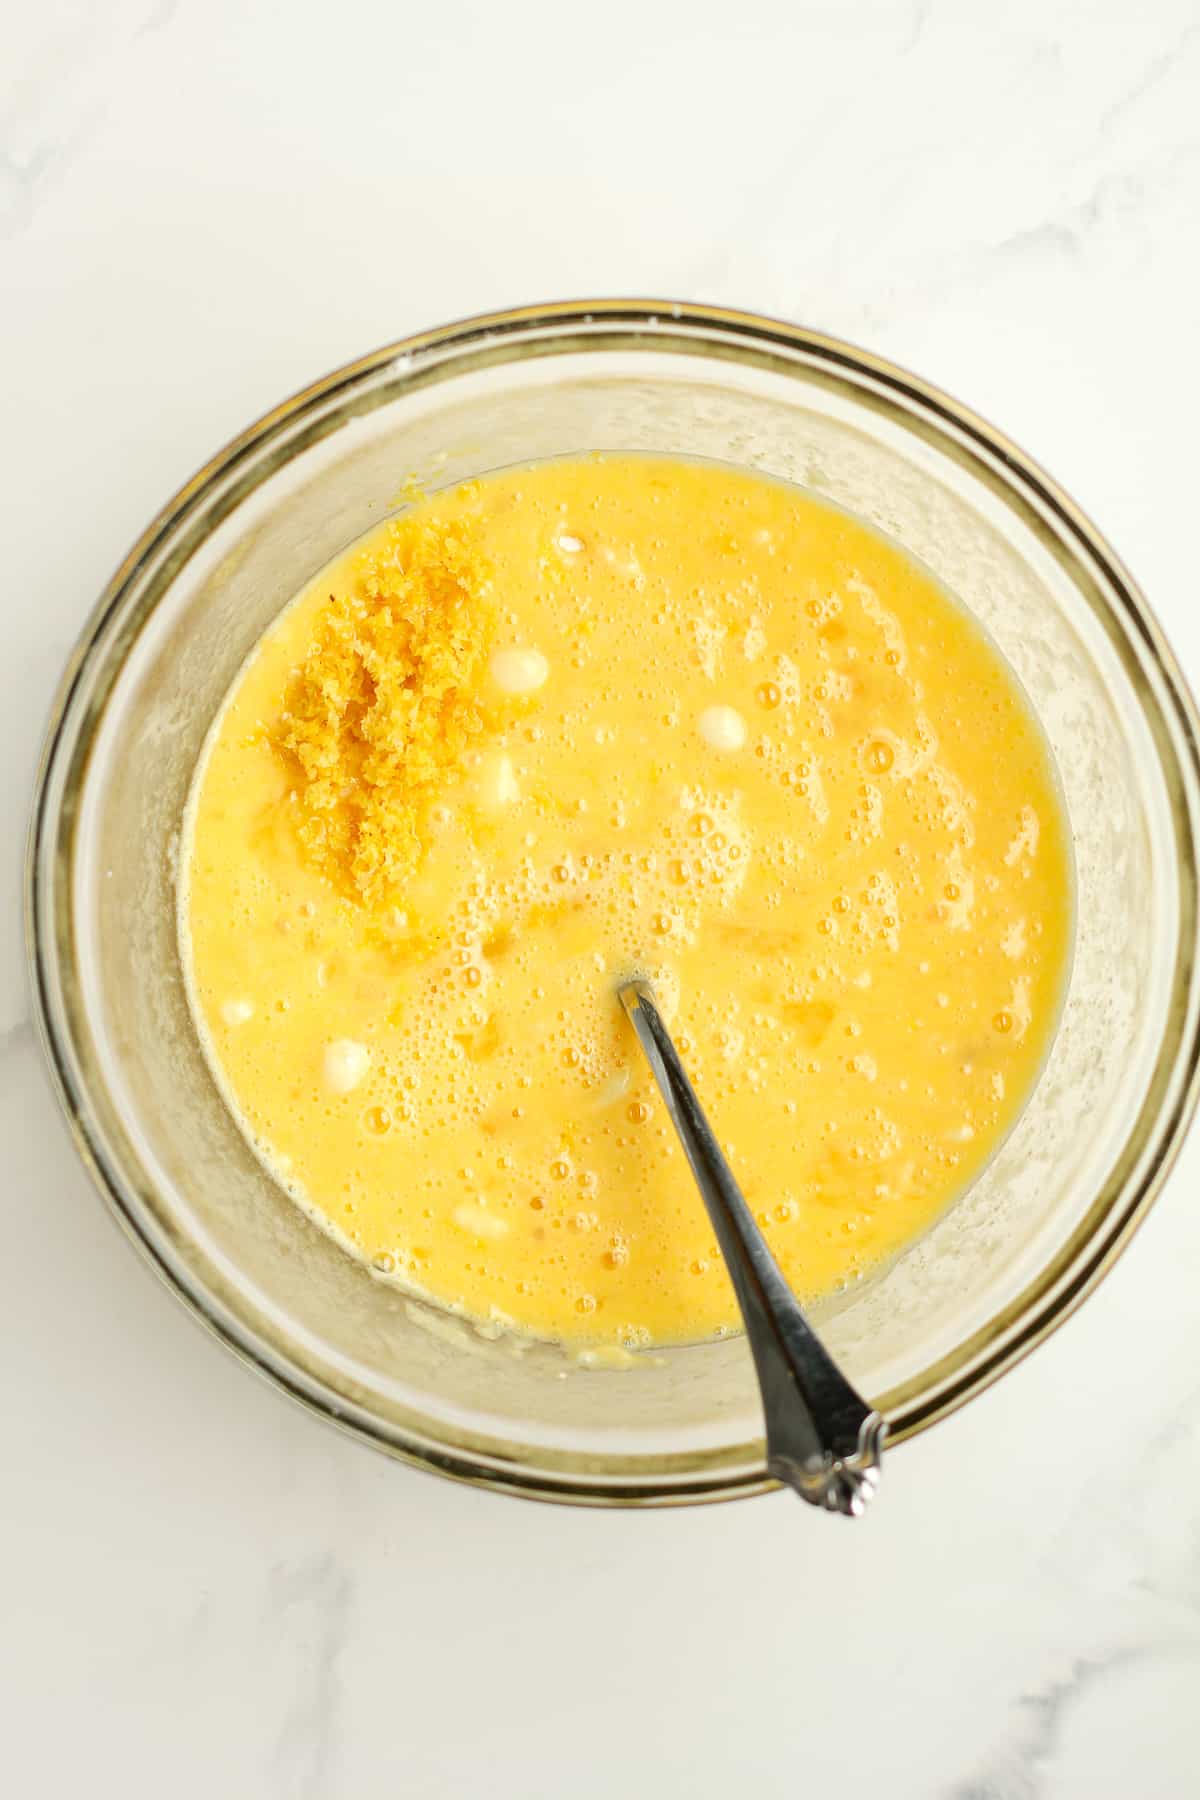 A bowl of the lemon filling with the zest on top.